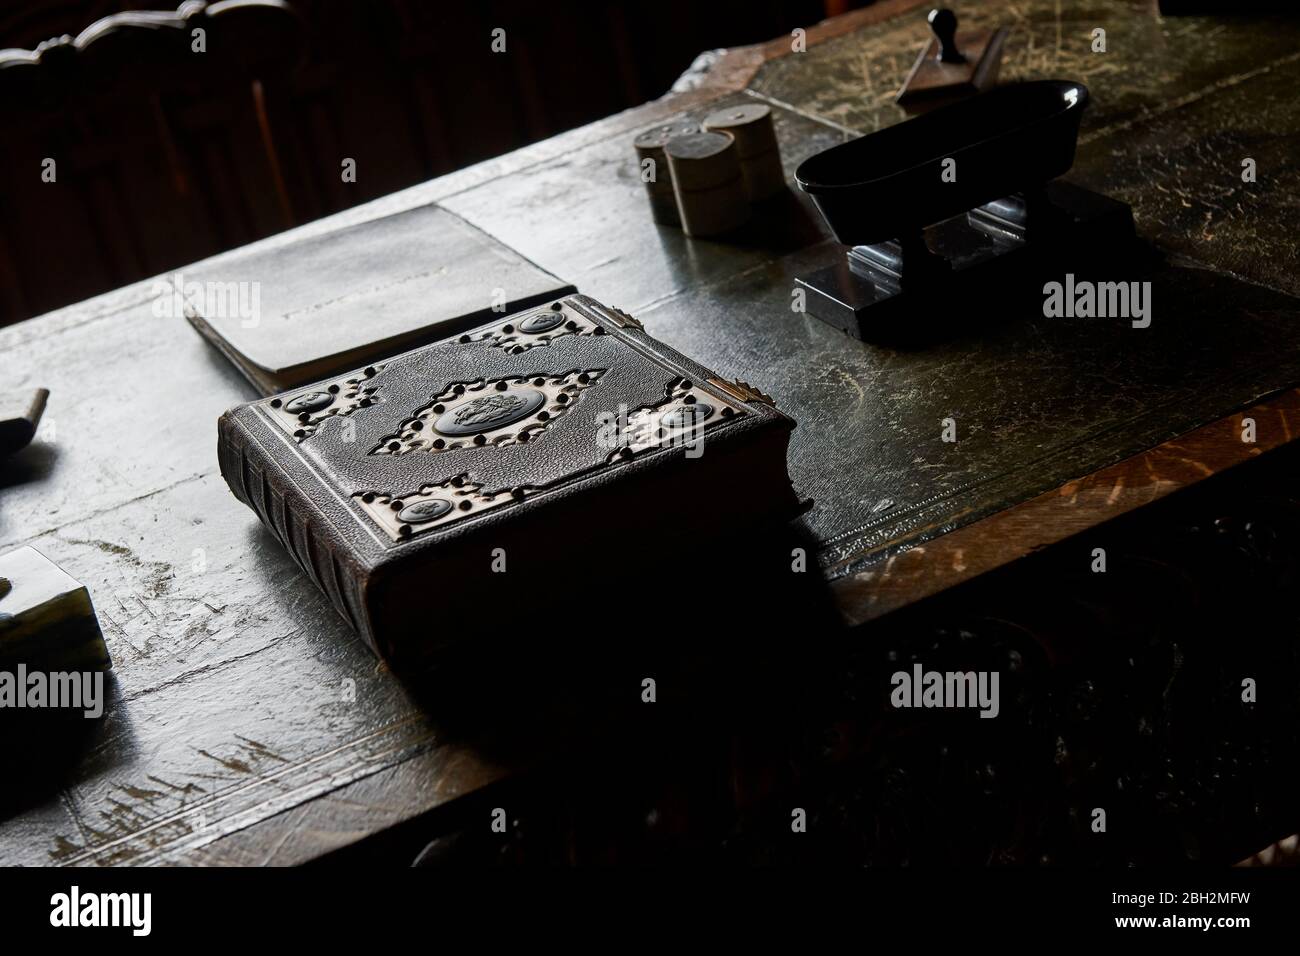 Antique unopened large bound book on an old oak desk table in natural light Stock Photo